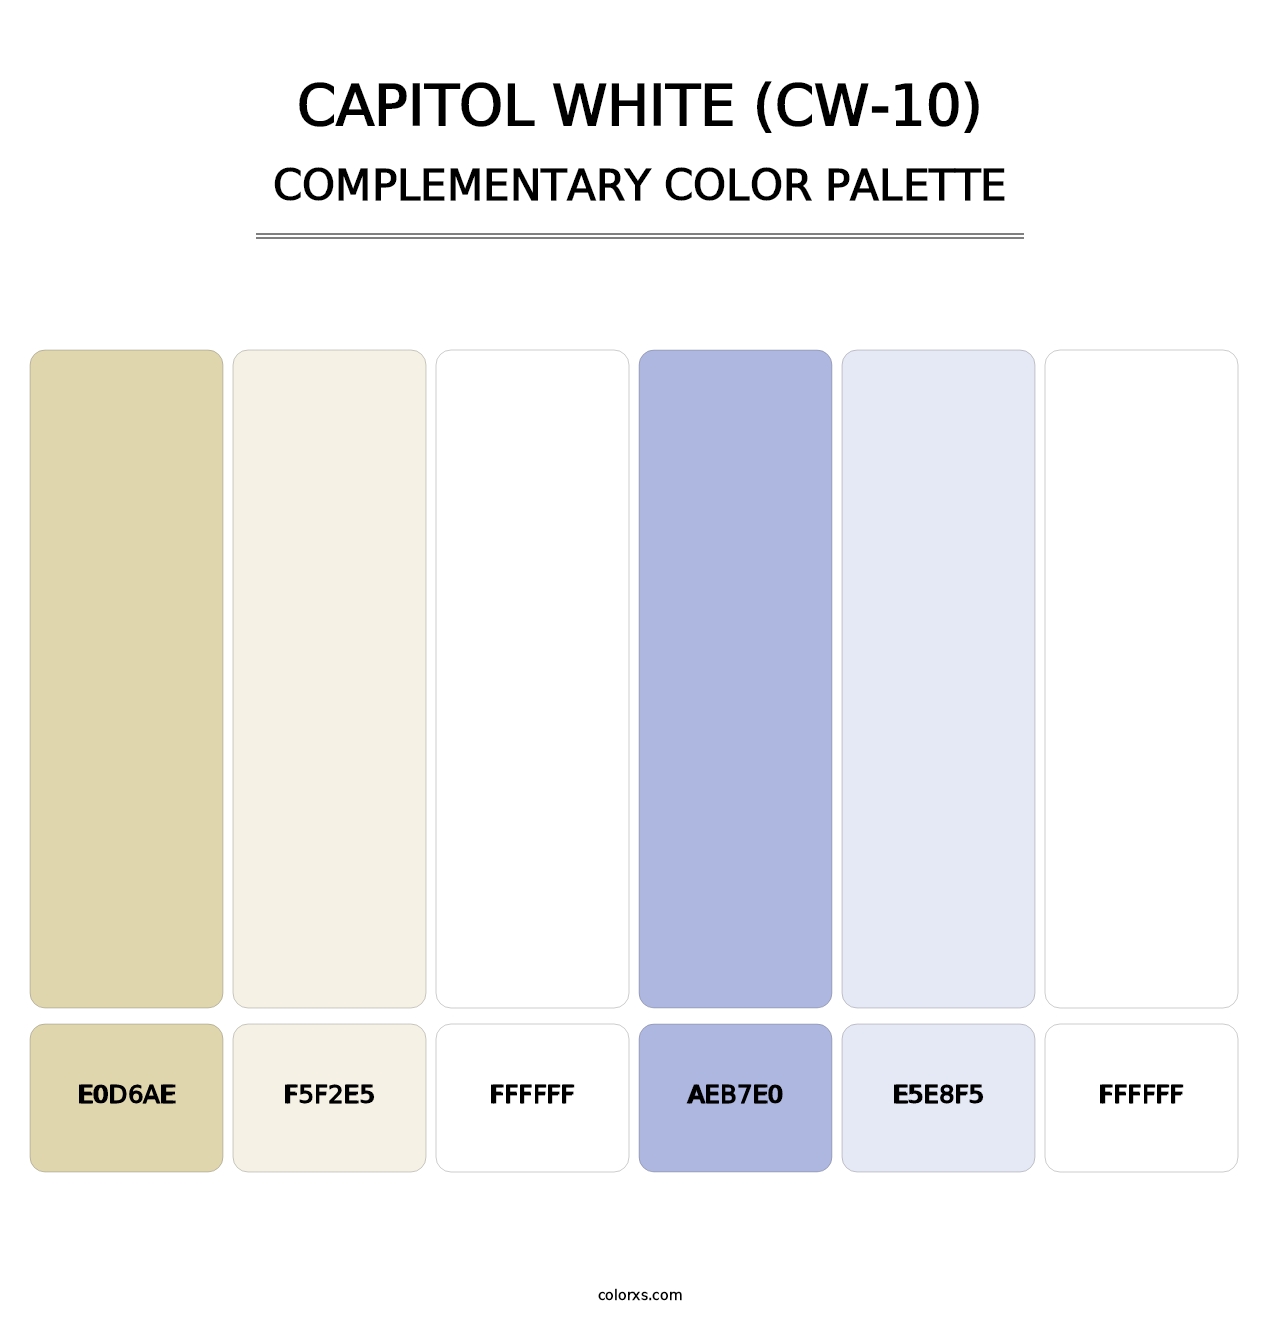 Capitol White (CW-10) - Complementary Color Palette